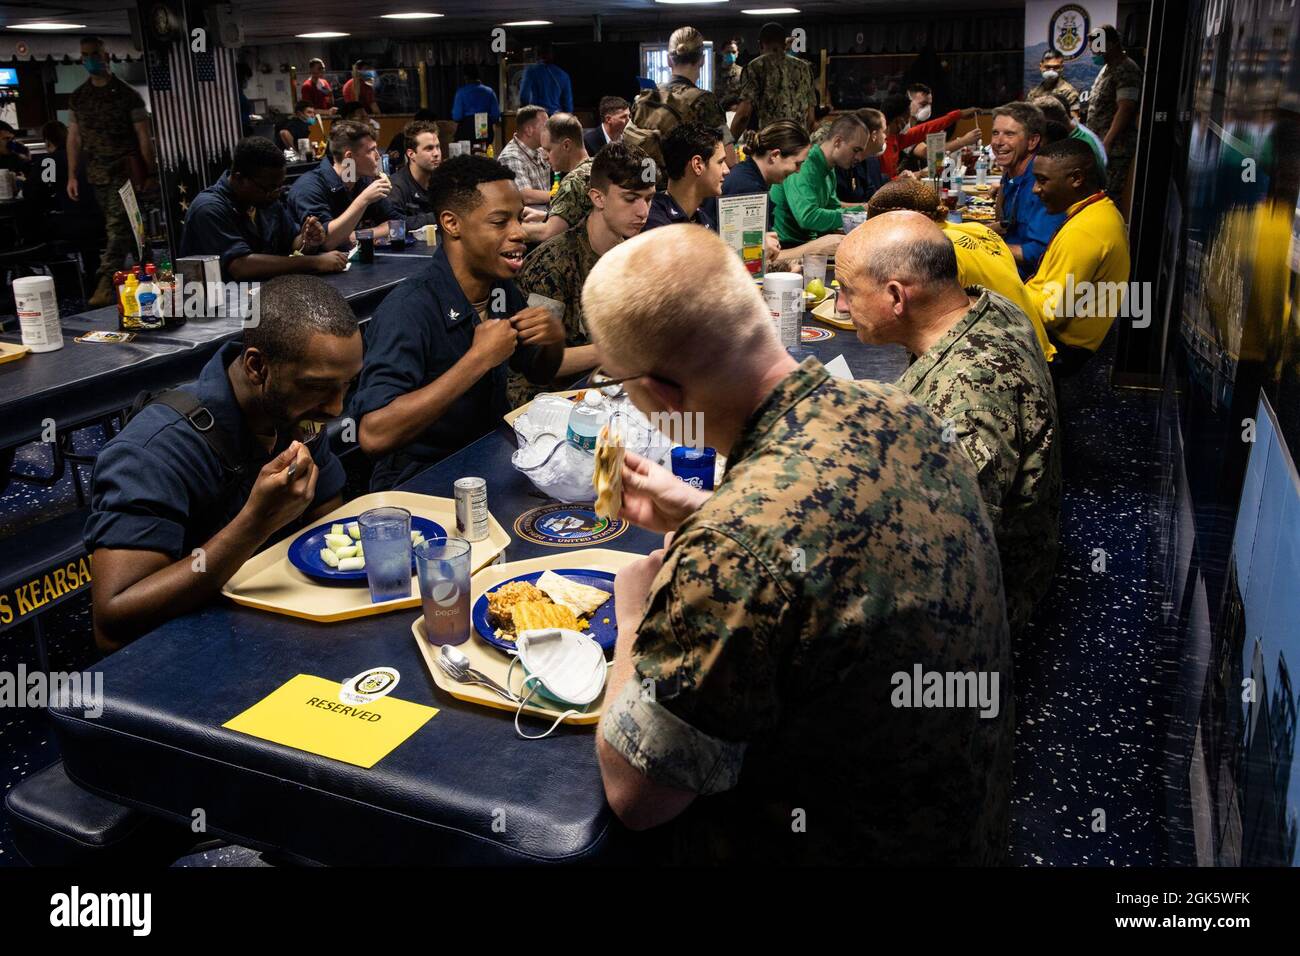 U.S. Secretary of the Navy Carlos Del Toro, U.S. Representative Rob Wittman (R-VA), and U.S. Navy Adm. Michael Gilday, Chief of Naval Operations, have lunch with Marines and Sailors aboard the USS Kearsarge during Large Scale Exercise (LSE) 2021, off the coast of North Carolina, Aug. 10, 2021. II MEF is a maritime force inextricably linked to our Navy partners in U.S. 6th and 2nd Fleets, creating mutual interdependence with our Fleet counterparts leverages our collective capabilities and increases maritime lethality. LSE 2021 merges live and synthetic training capabilities to create an intense Stock Photo